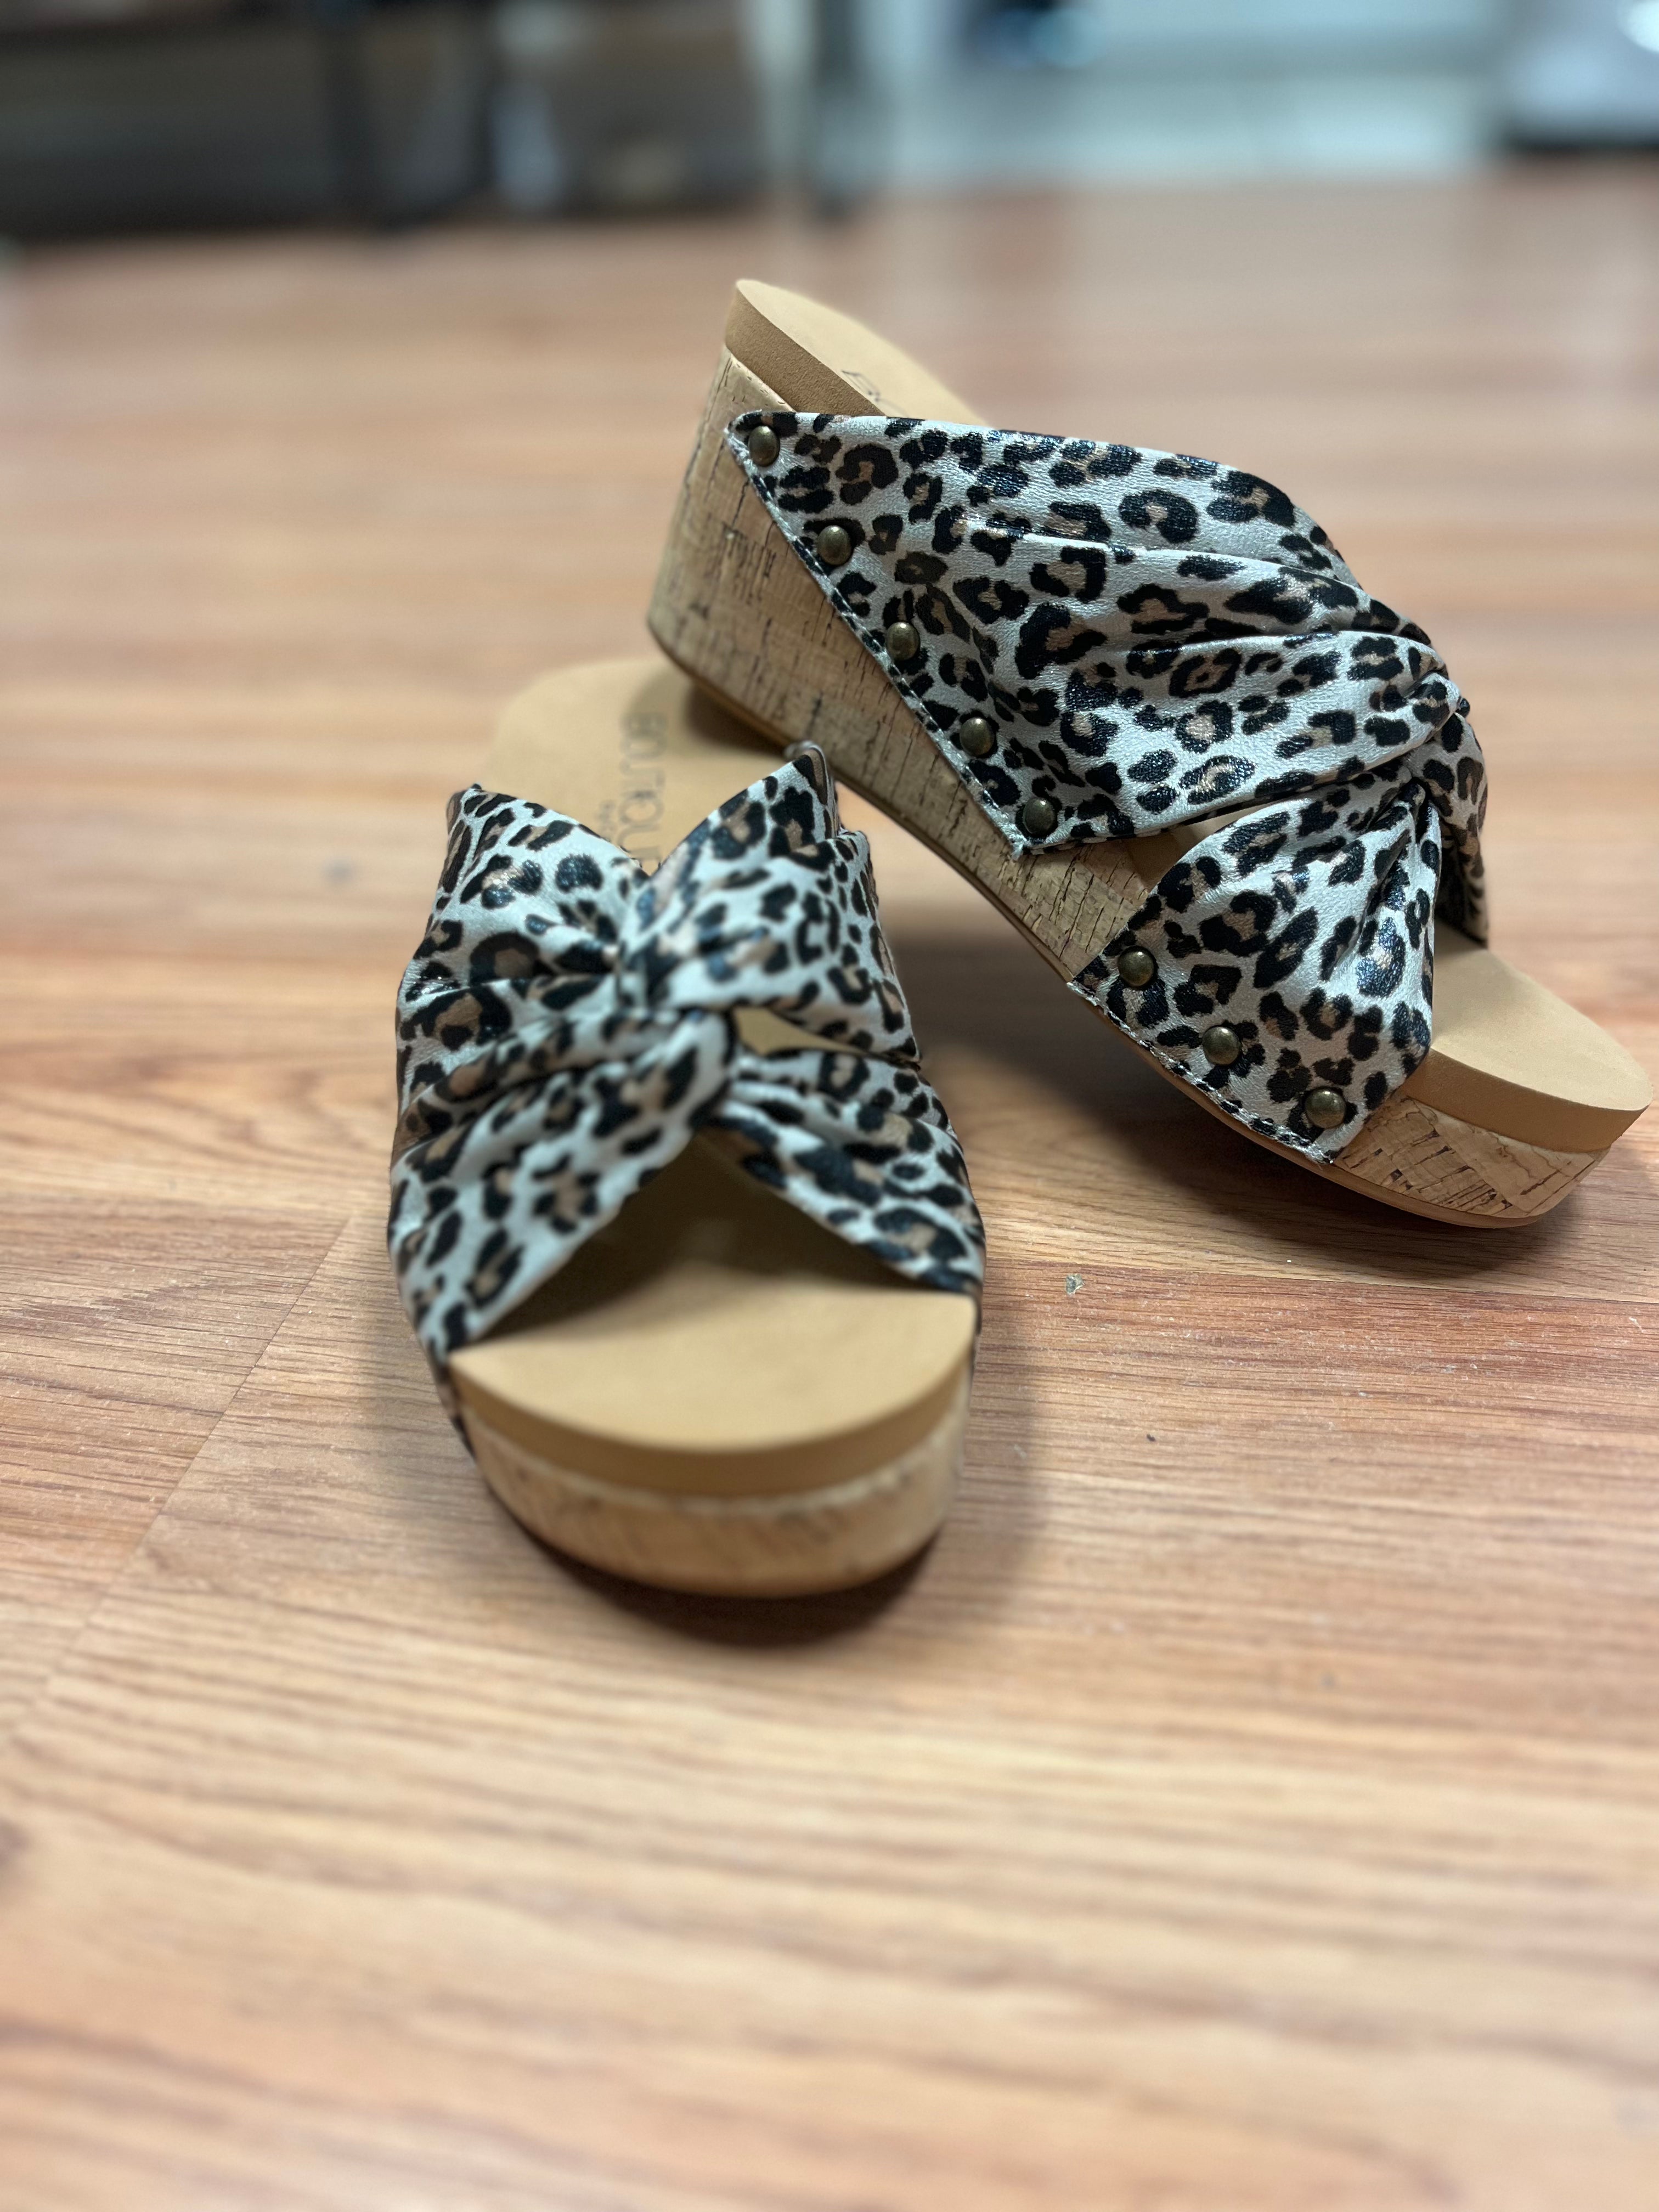 Cheerful Small Leopard Sandal by Corkys